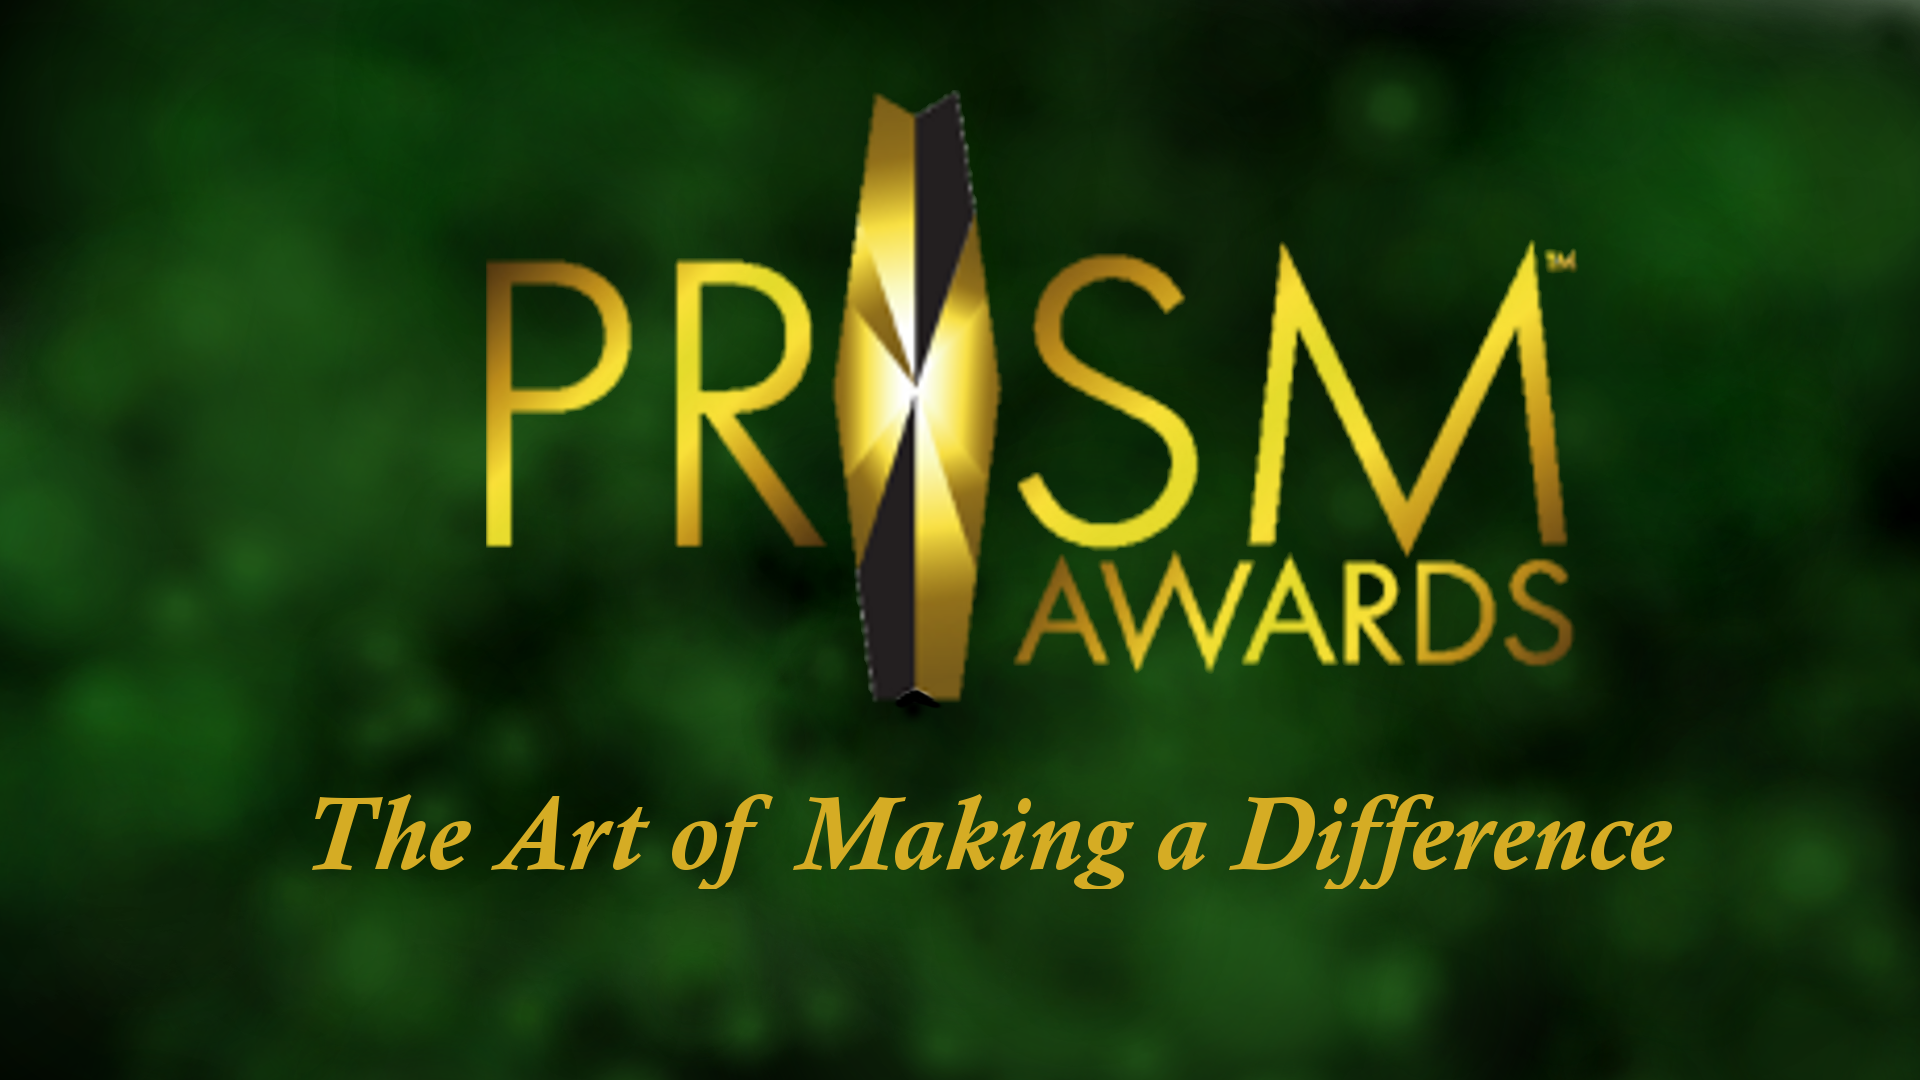 Entertainment Industries Council's 18th Annual PRISM Awards Showcase To